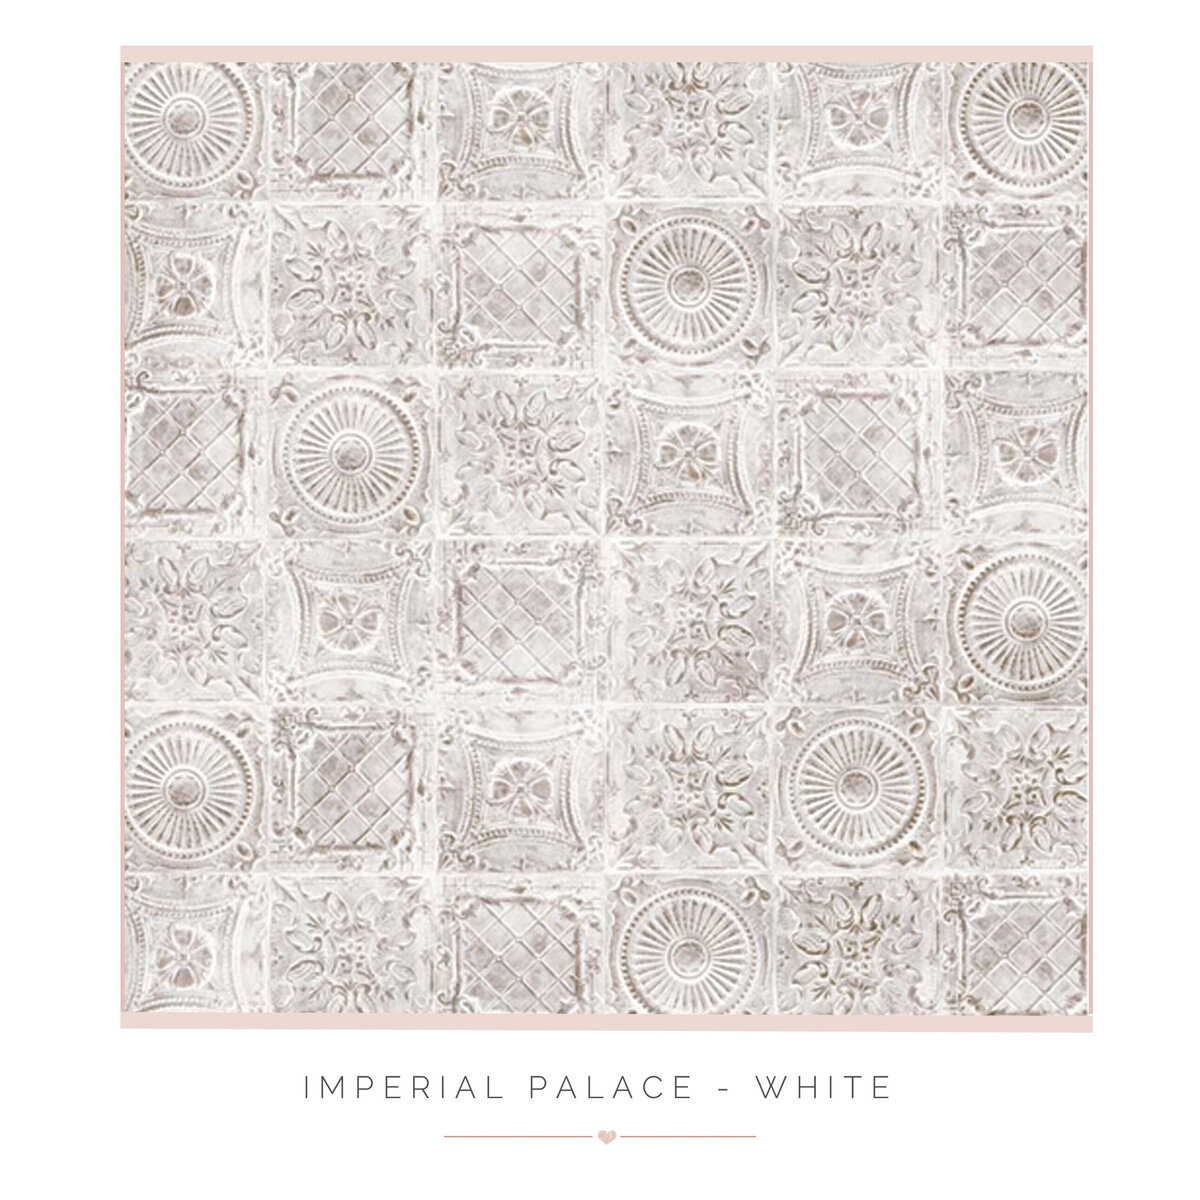 Imperial Palace - White